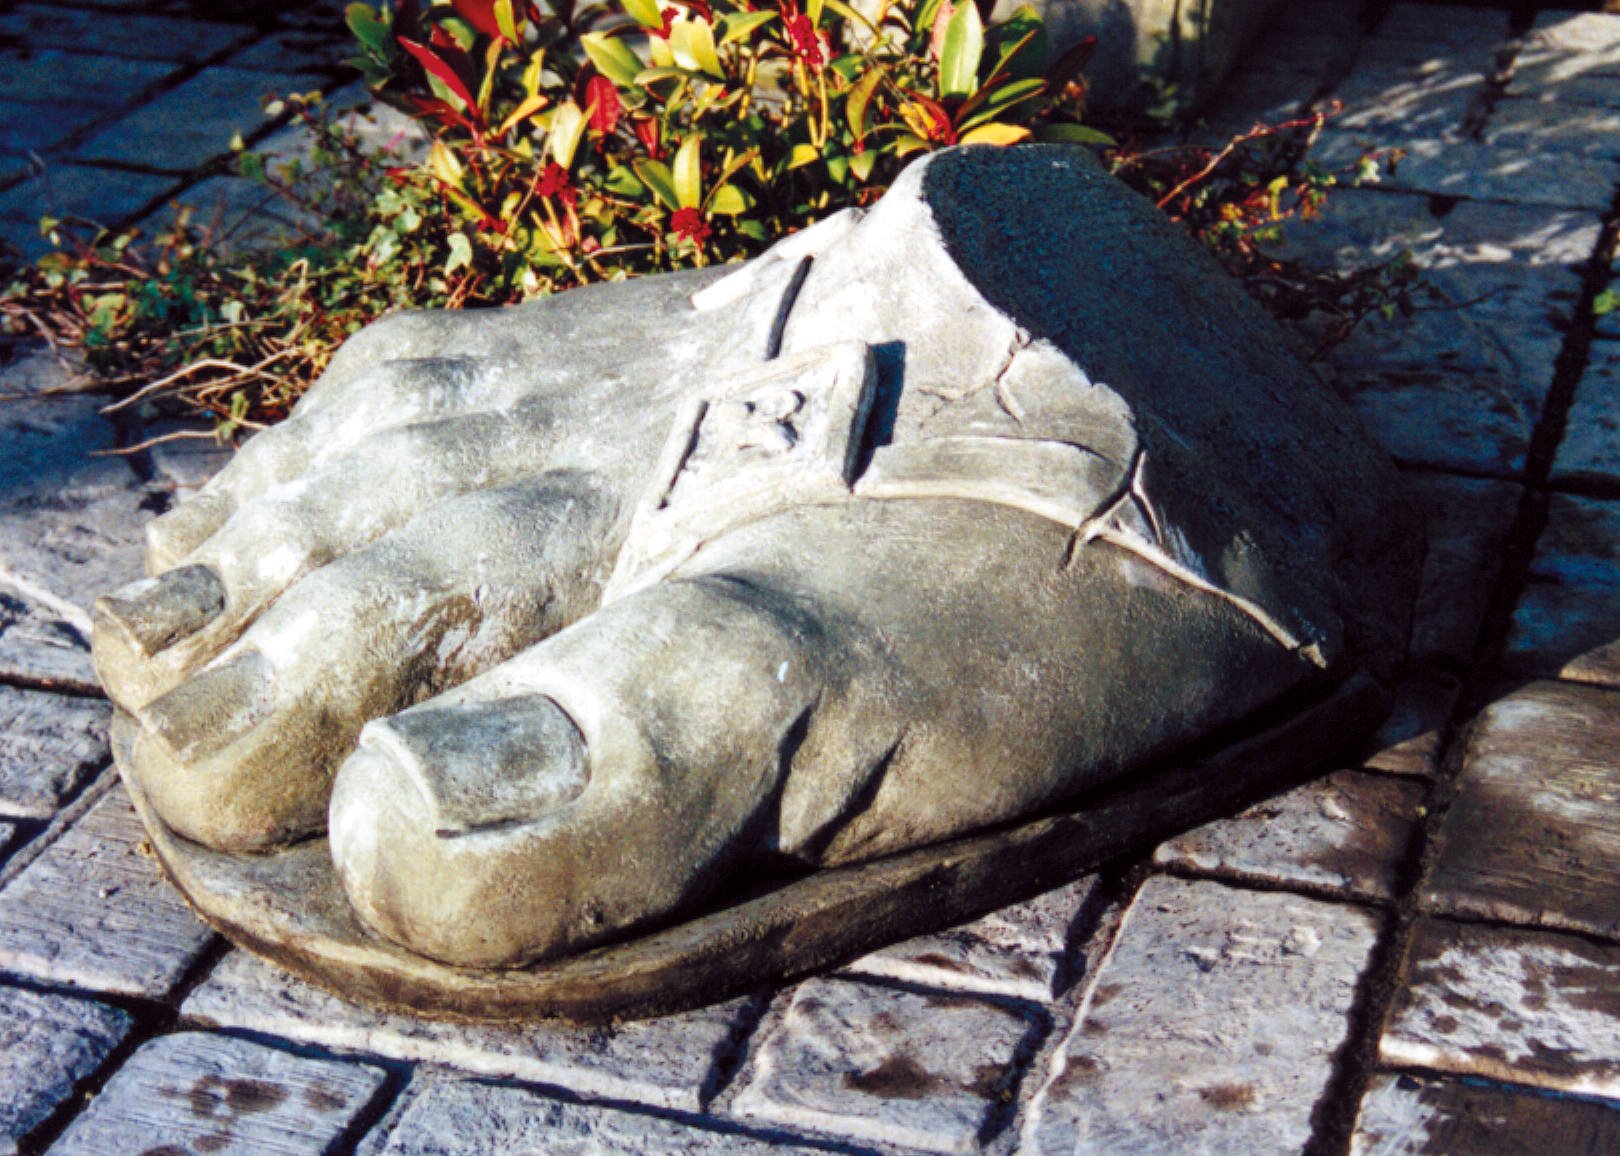 Giant Foot Stone Ornament